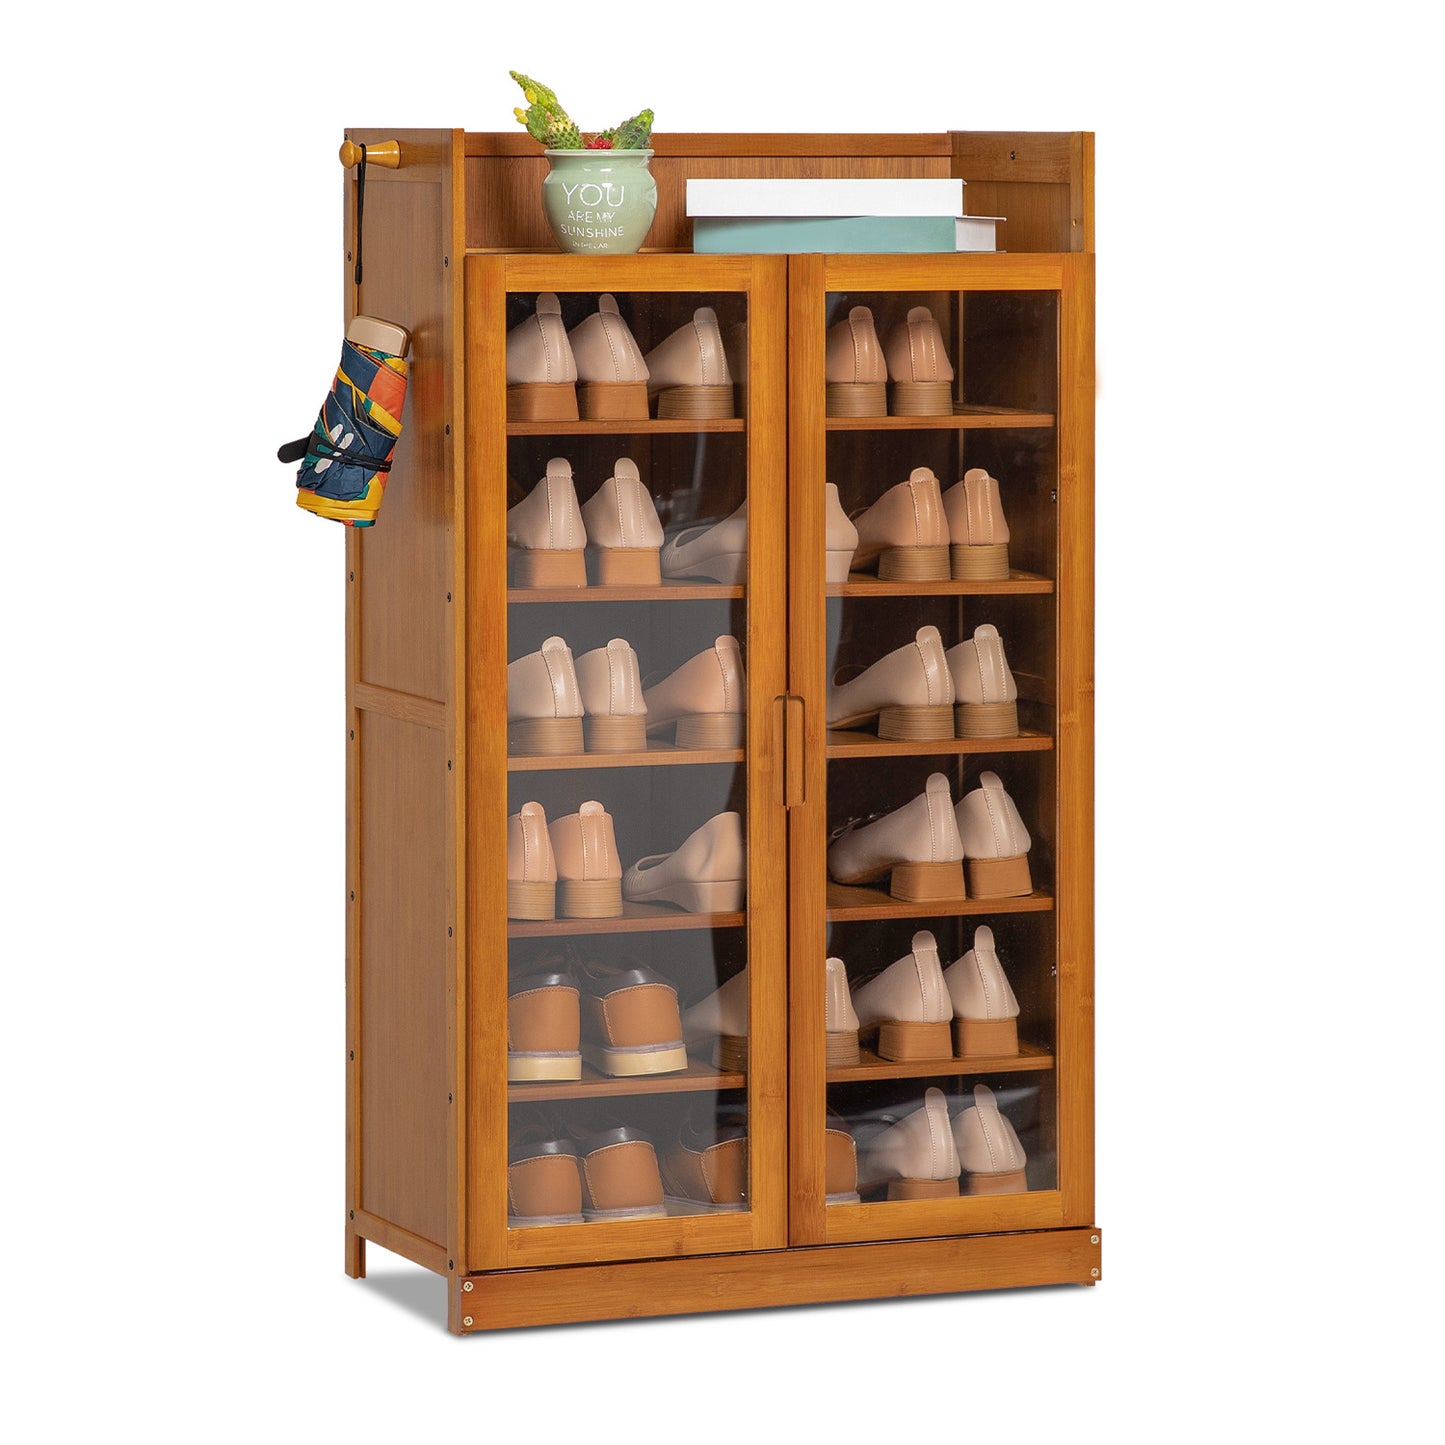 Visible Two-Doors Roofless Shoe Organizer - Bamboo/Acrylic - Brown